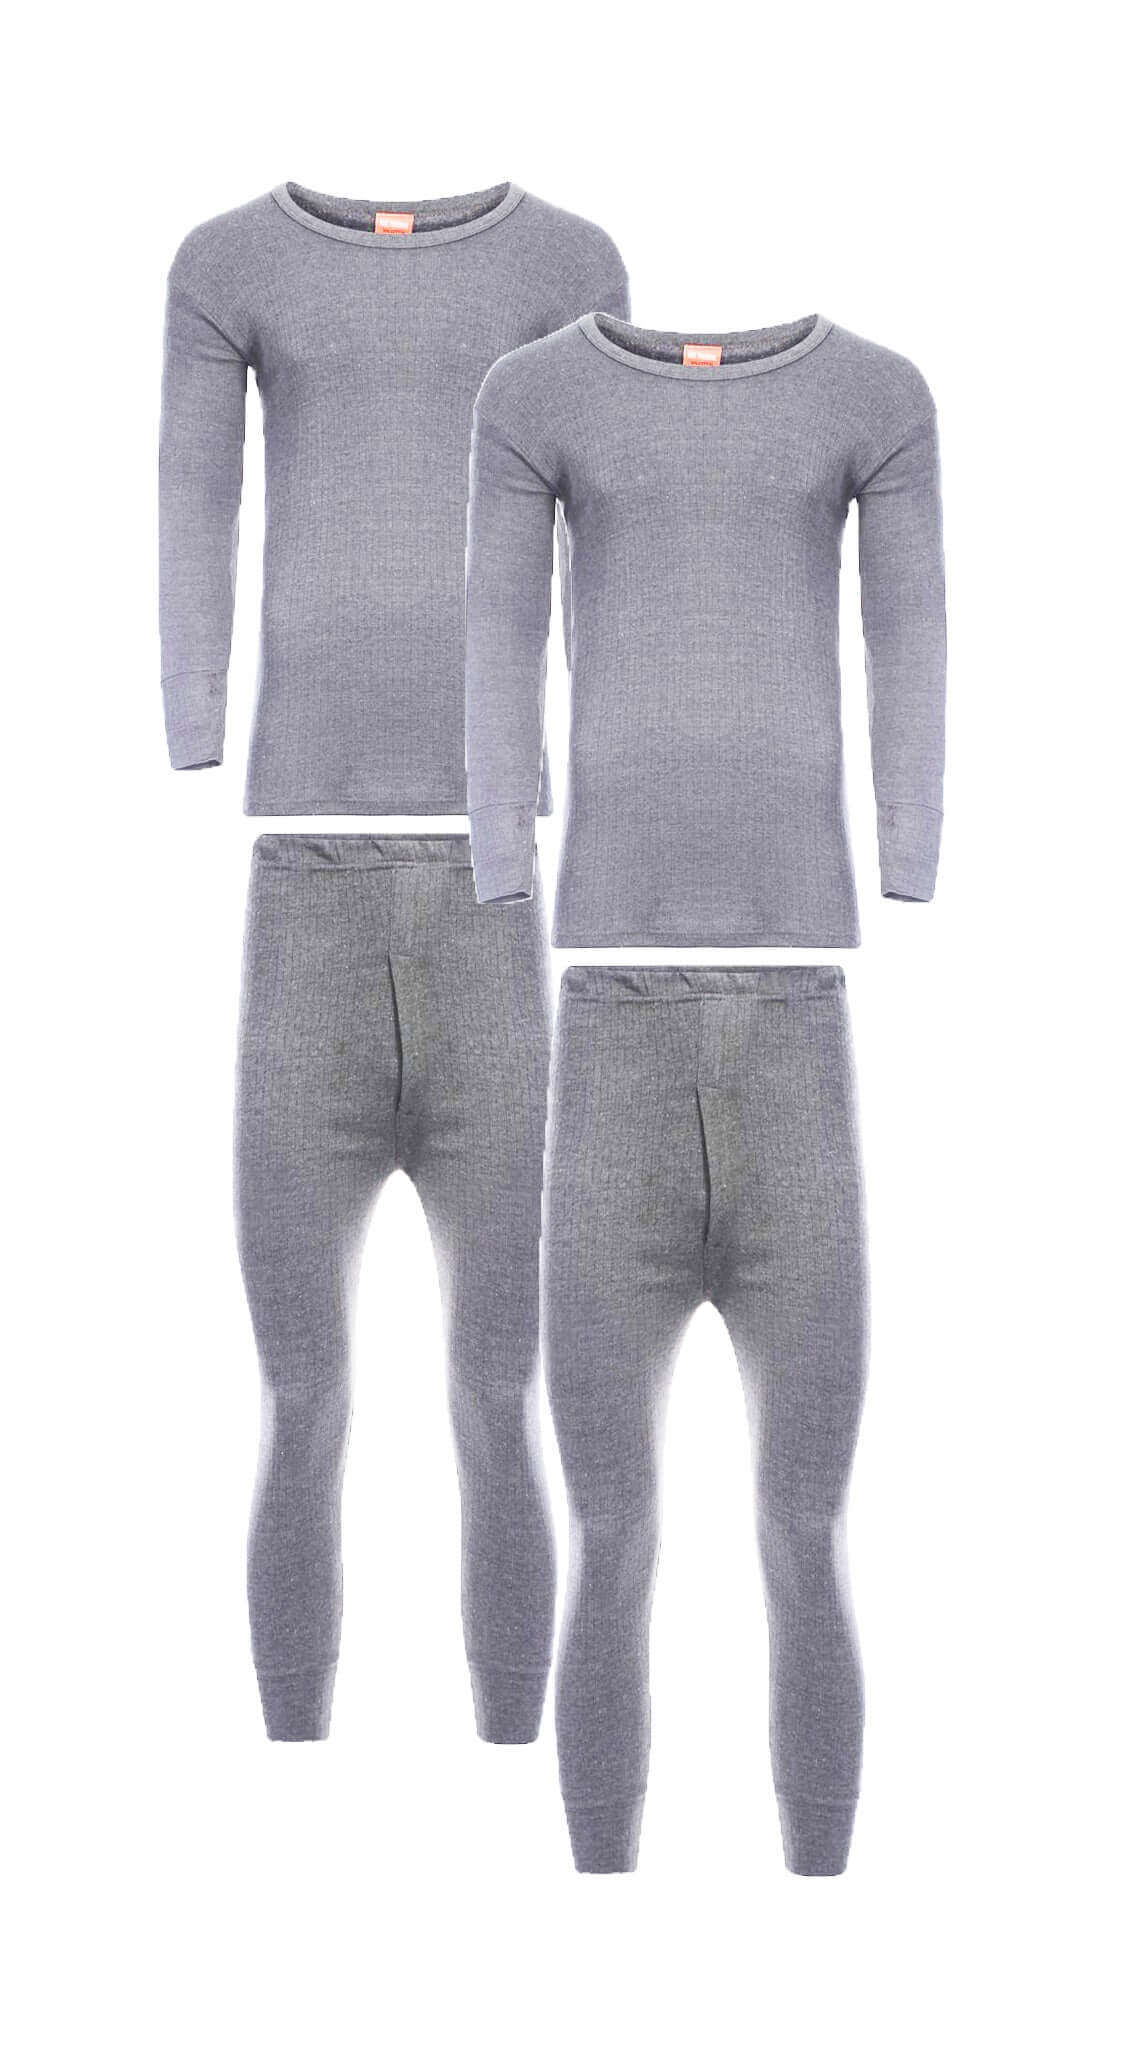 Jwl-winter Thermal Underwear Sets For Men Thermo Underwear Long